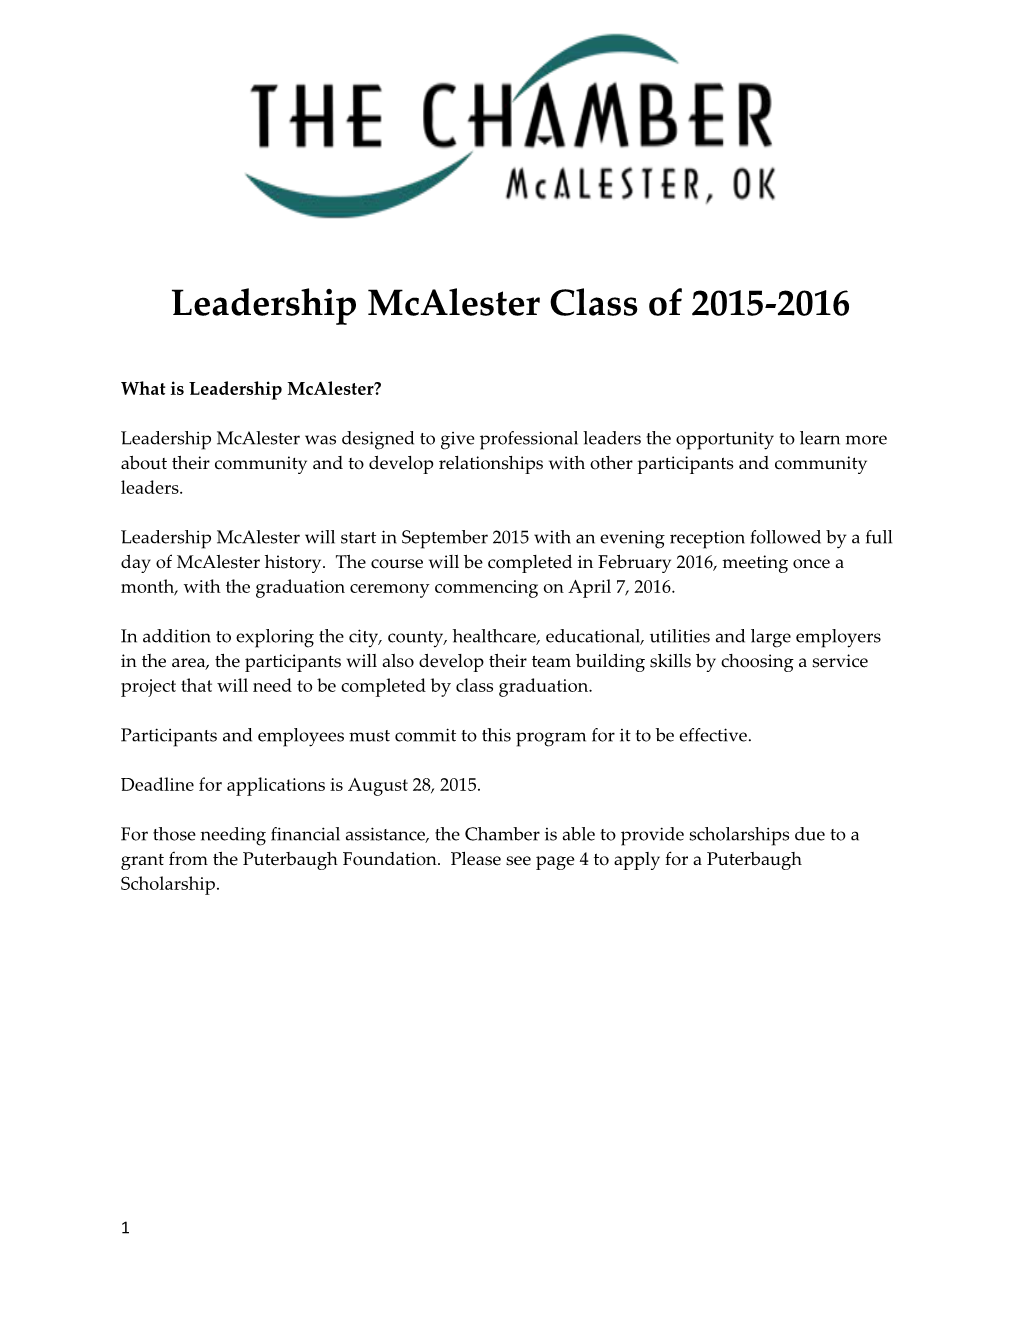 Leadership Mcalester Class of 2015-2016